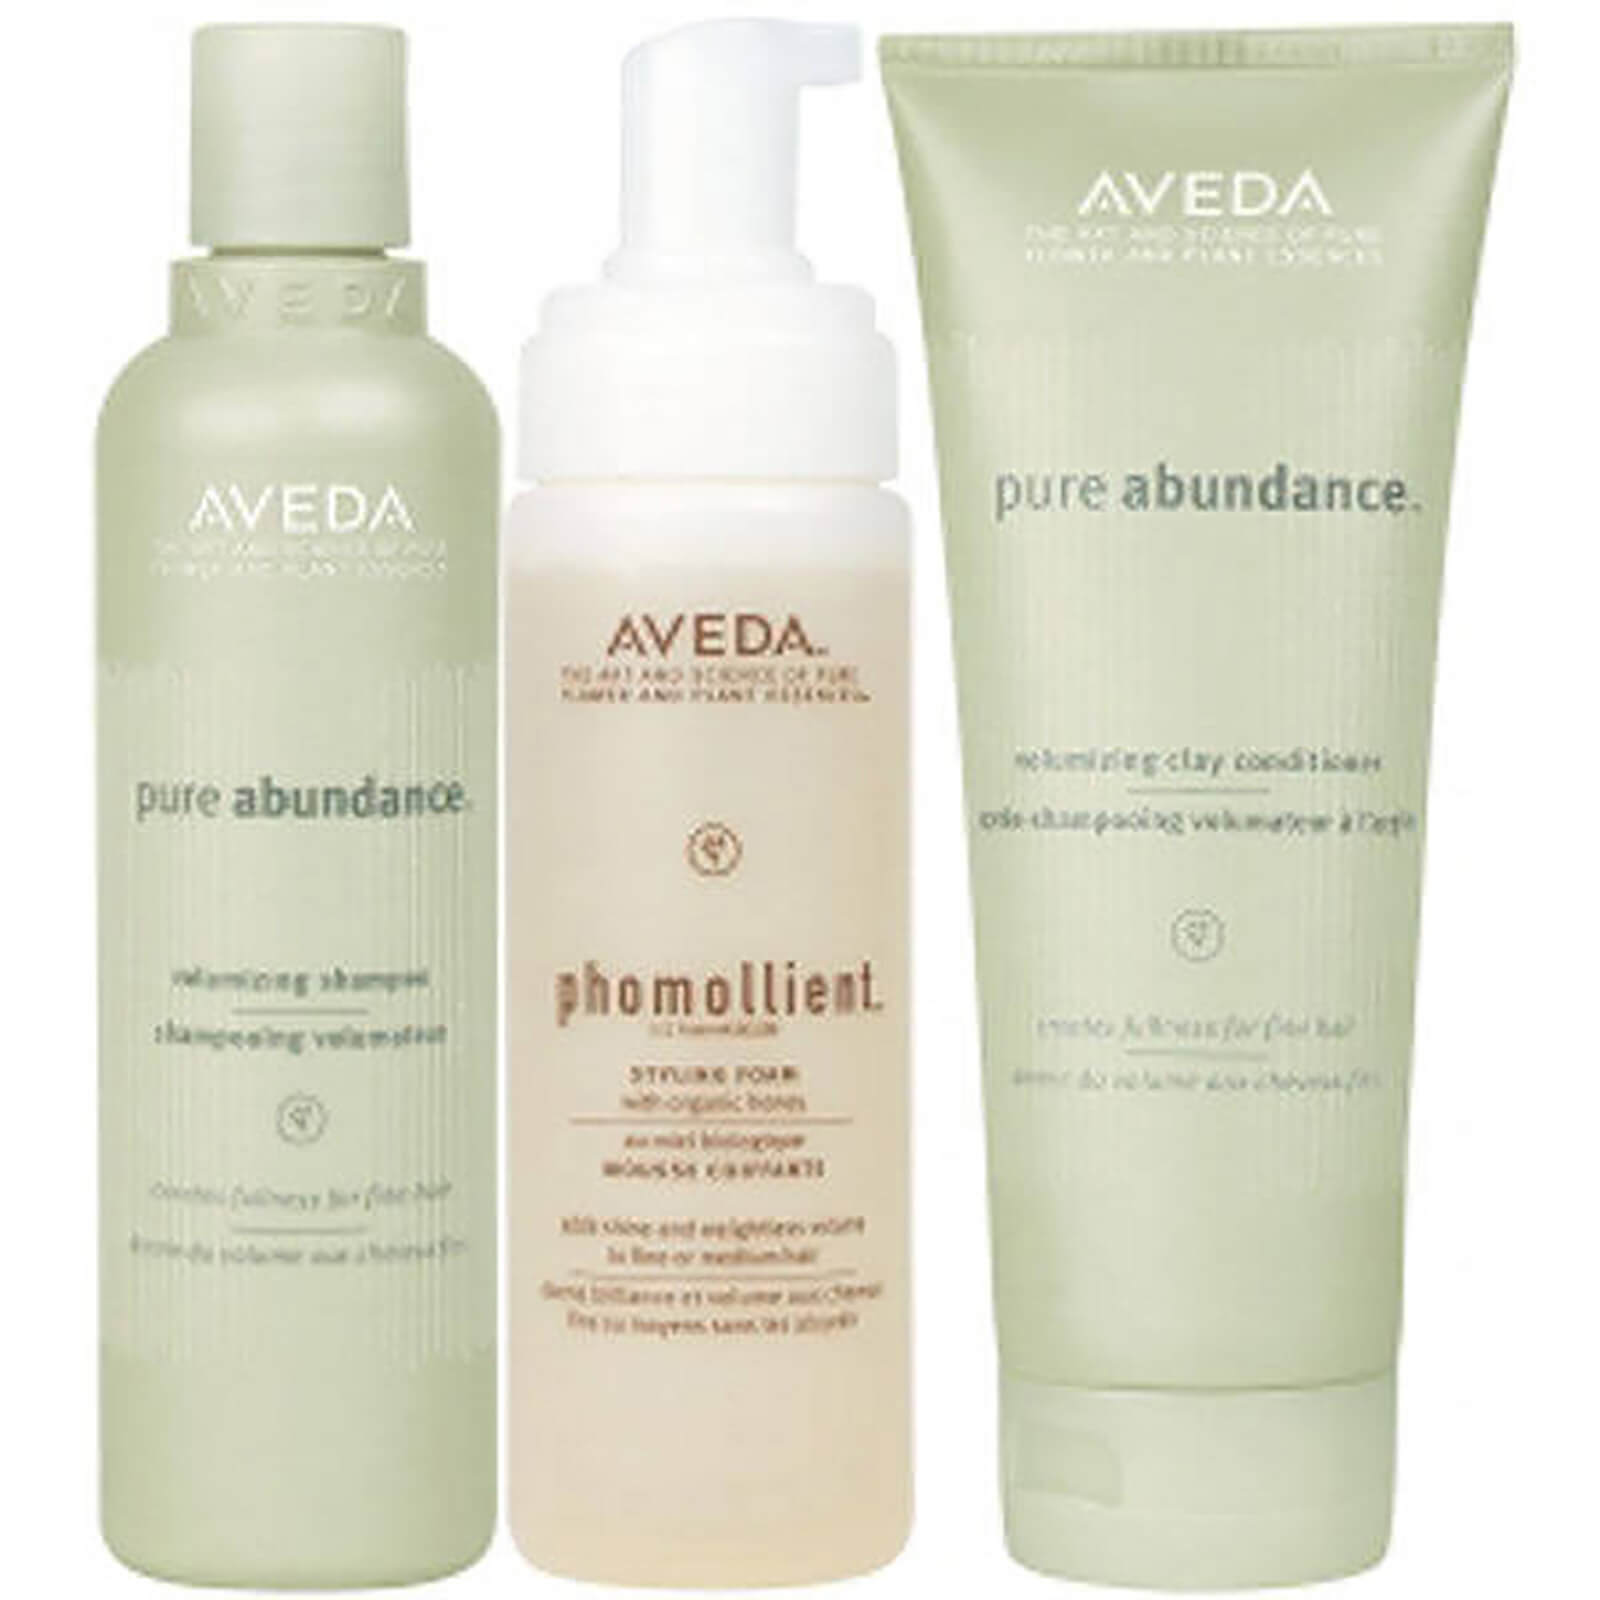 Image of Aveda Pump Up Volume Pack (3 Products)